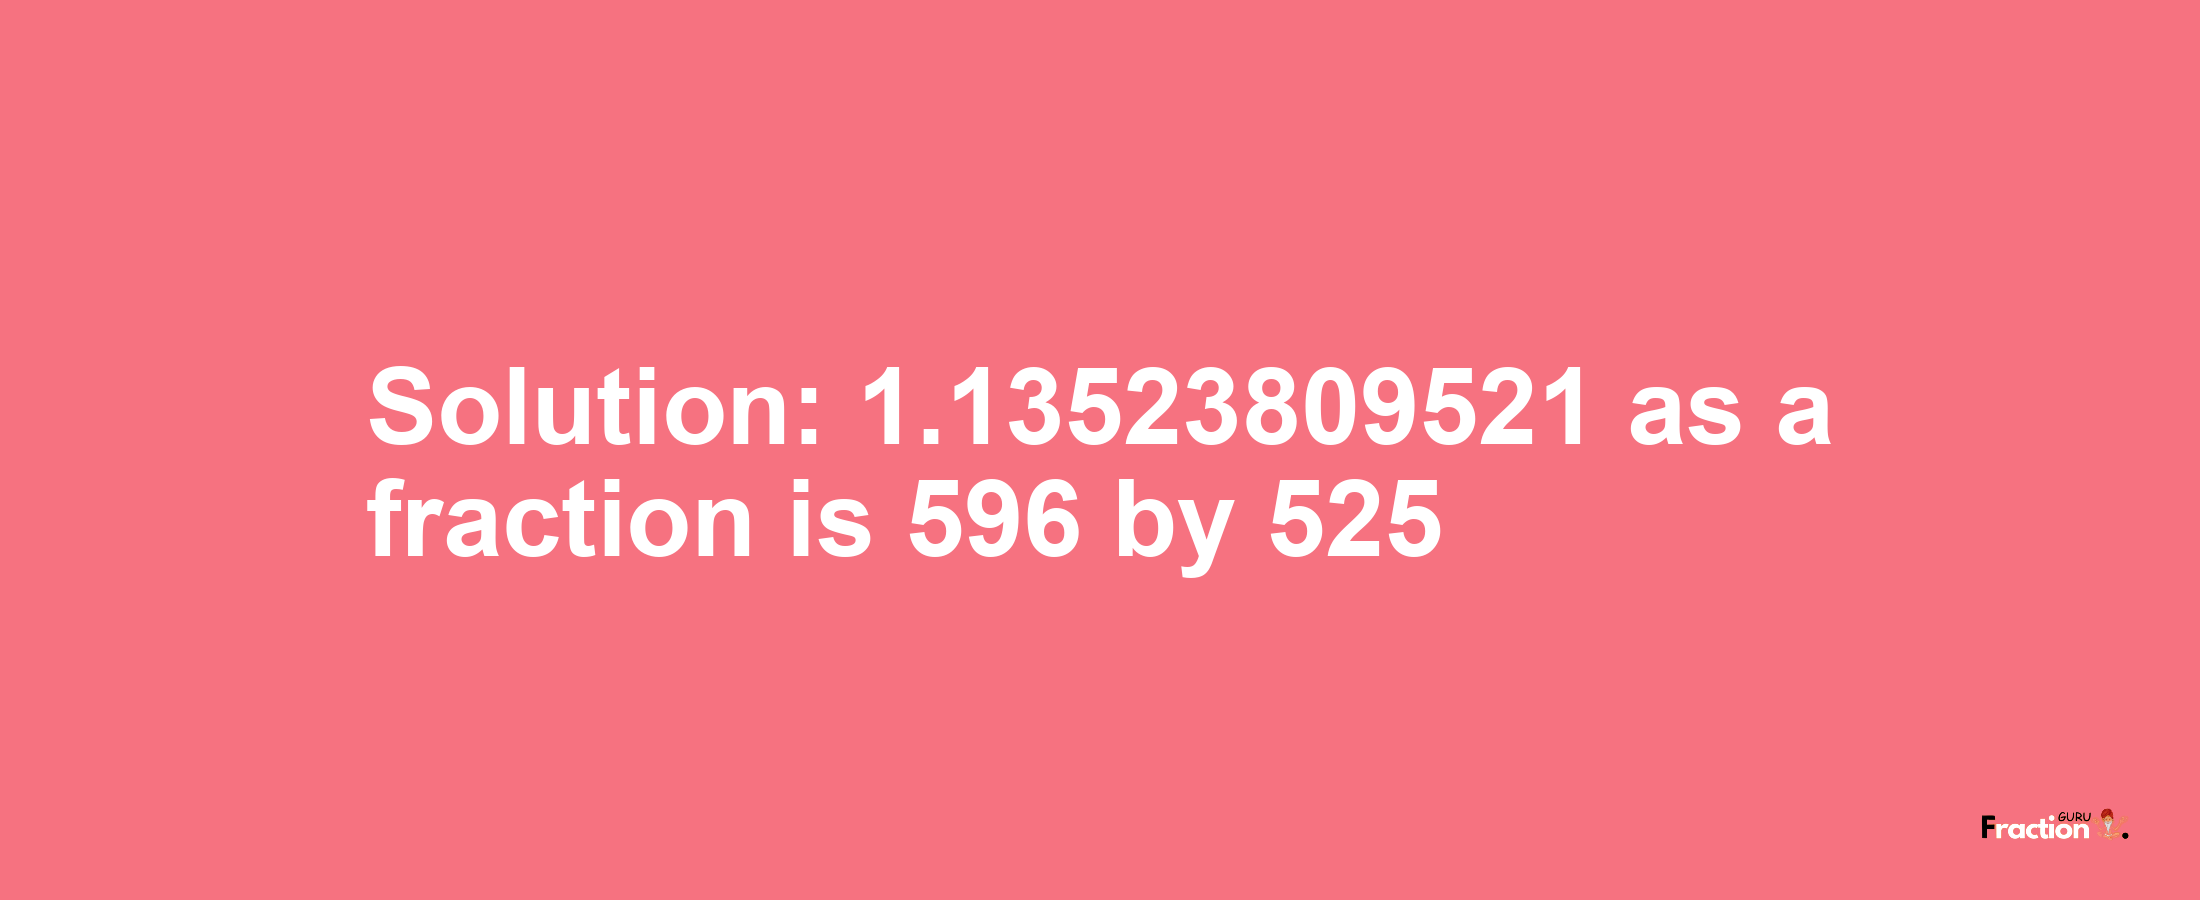 Solution:1.13523809521 as a fraction is 596/525